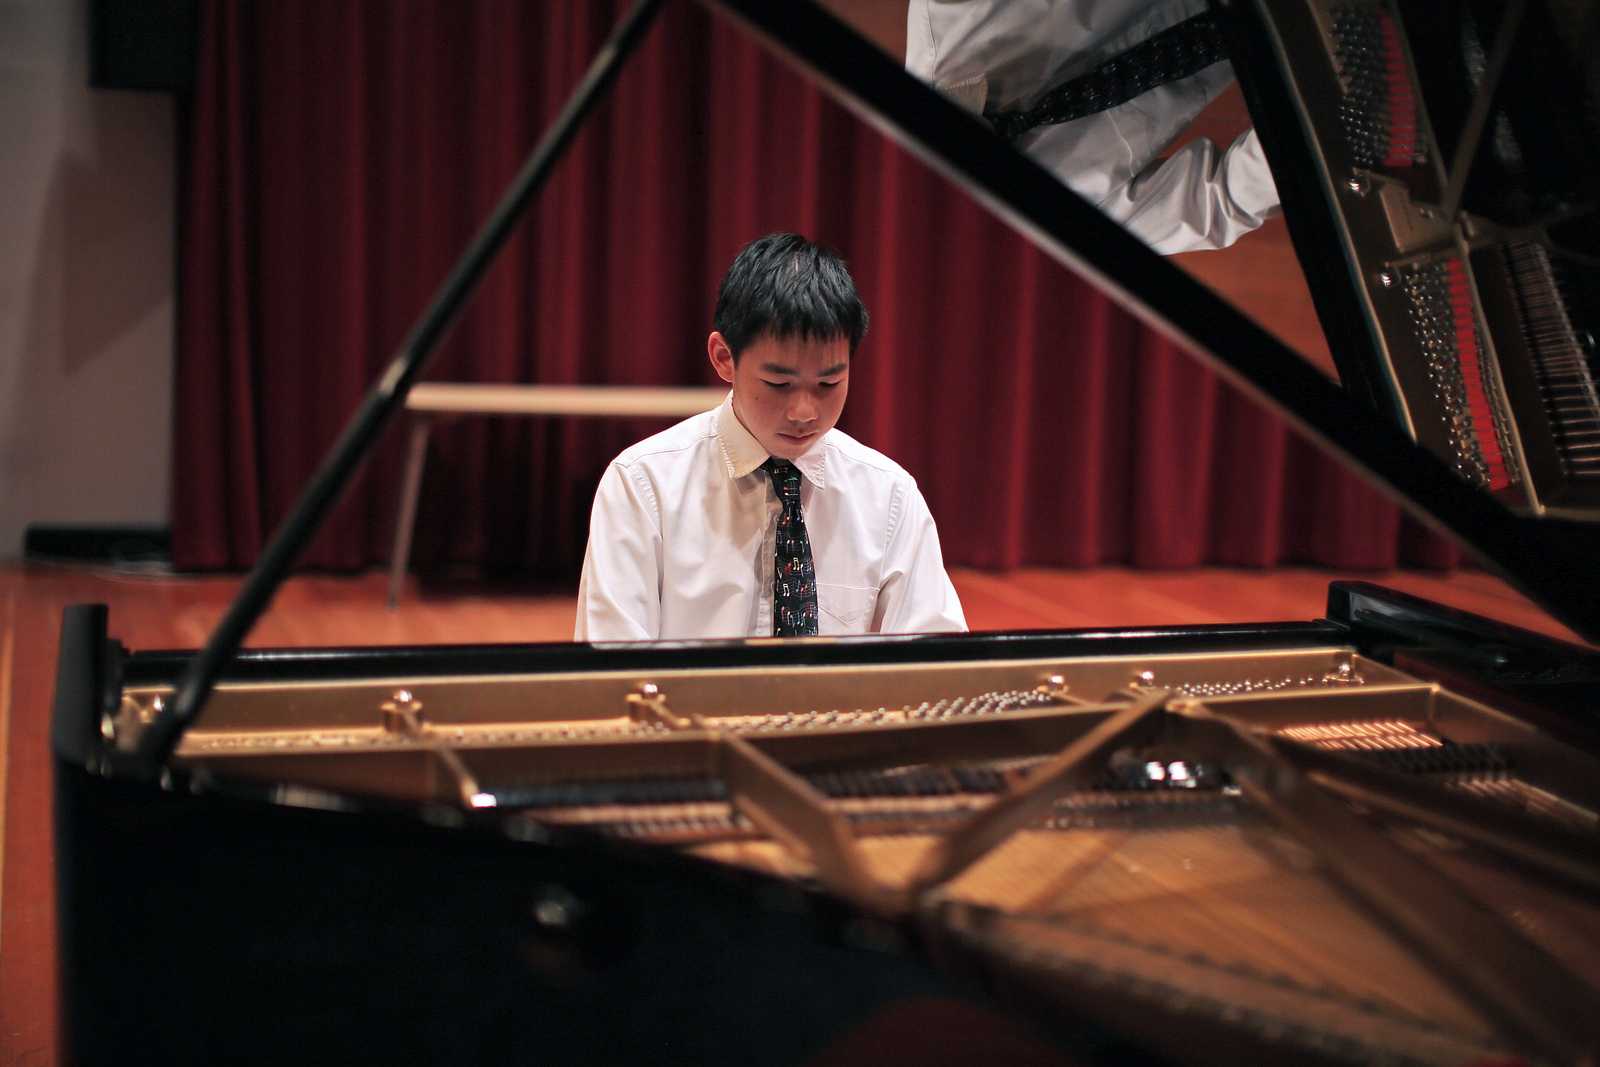 Alex Chien, one of the winners of the San Francisco Young Pianist Competition, warms up before a performance in Knuth Hall on Sept 6. Photo by John Ornelas / Xpress